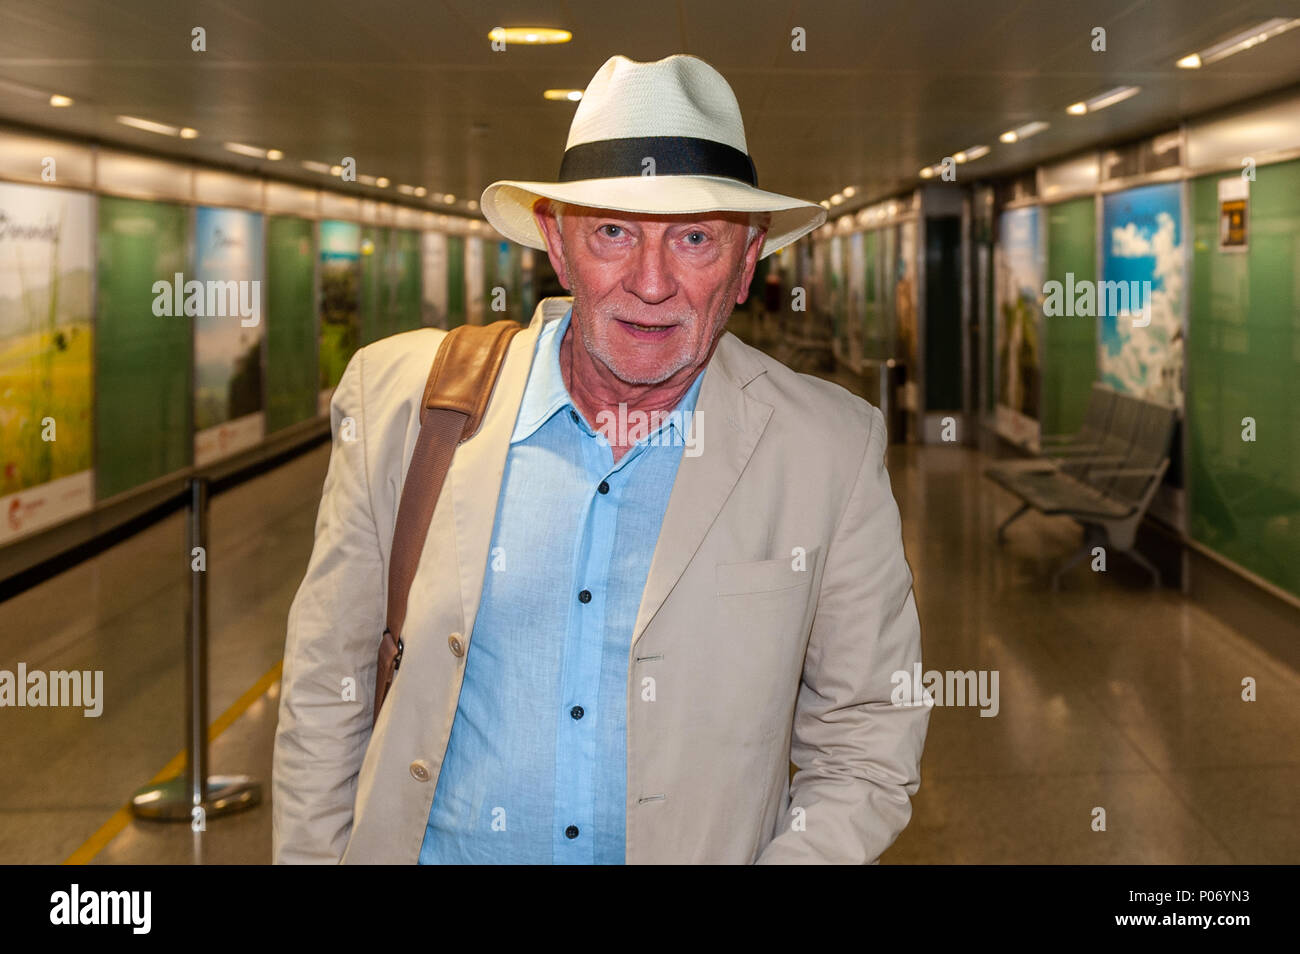 Malaga, Spain. 8th June, 2018. Irish musician, songwriter and record producer Phil Coulter is pictured at Malaga Airport after disembarking a flight from Cork, Ireland. Credit: Andy Gibson/Alamy Live News. Stock Photo